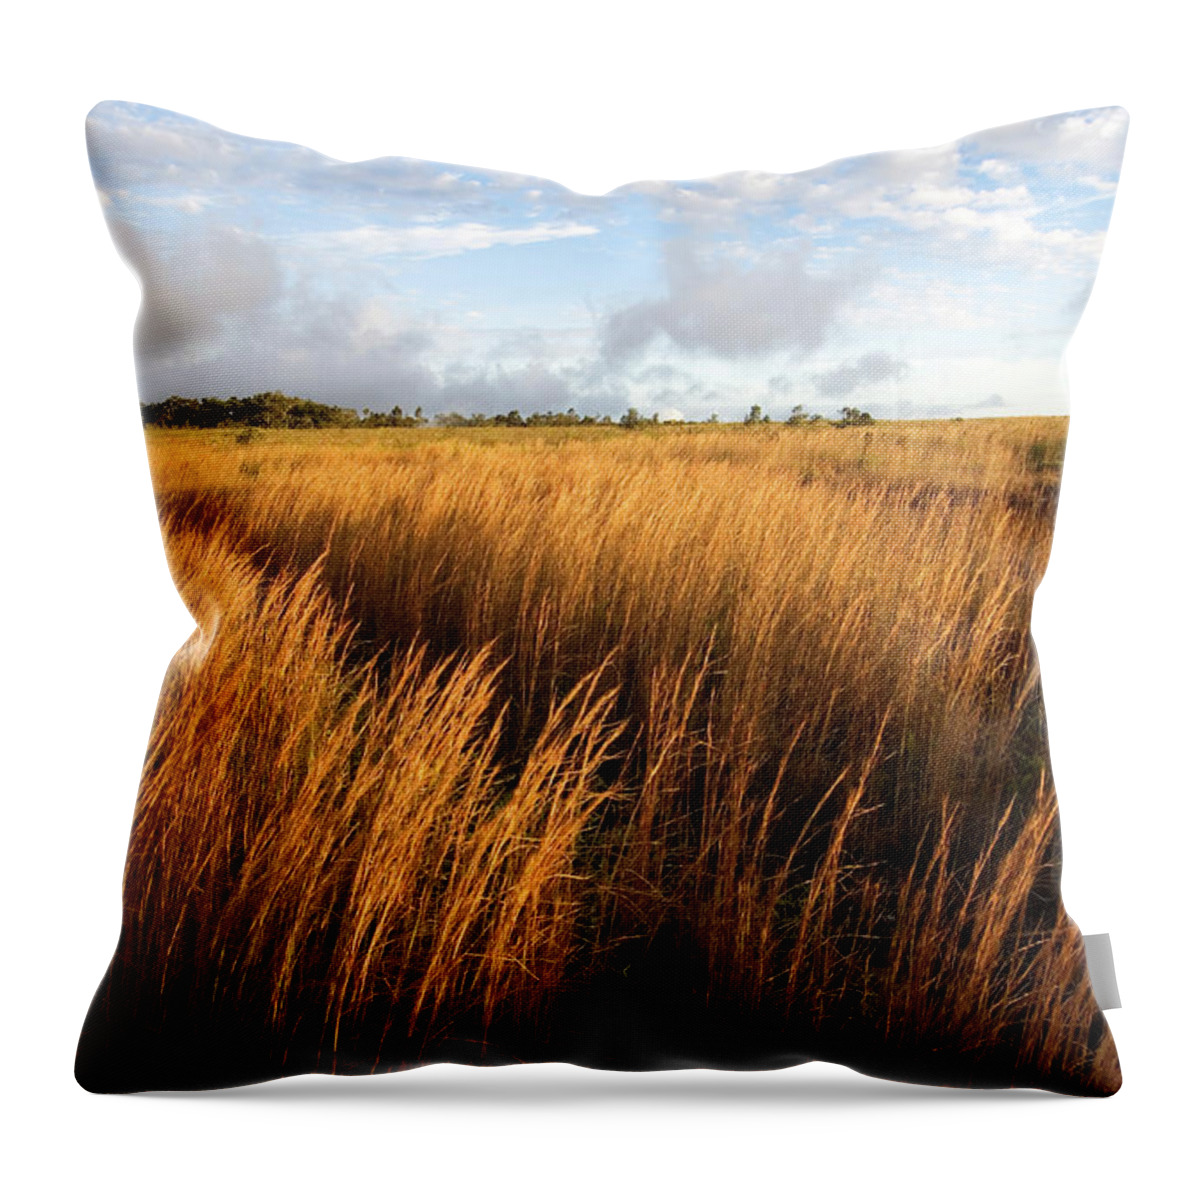 Hawaii Volcanoes National Park Throw Pillow featuring the photograph Steaming Bluff Landscape by John Elk